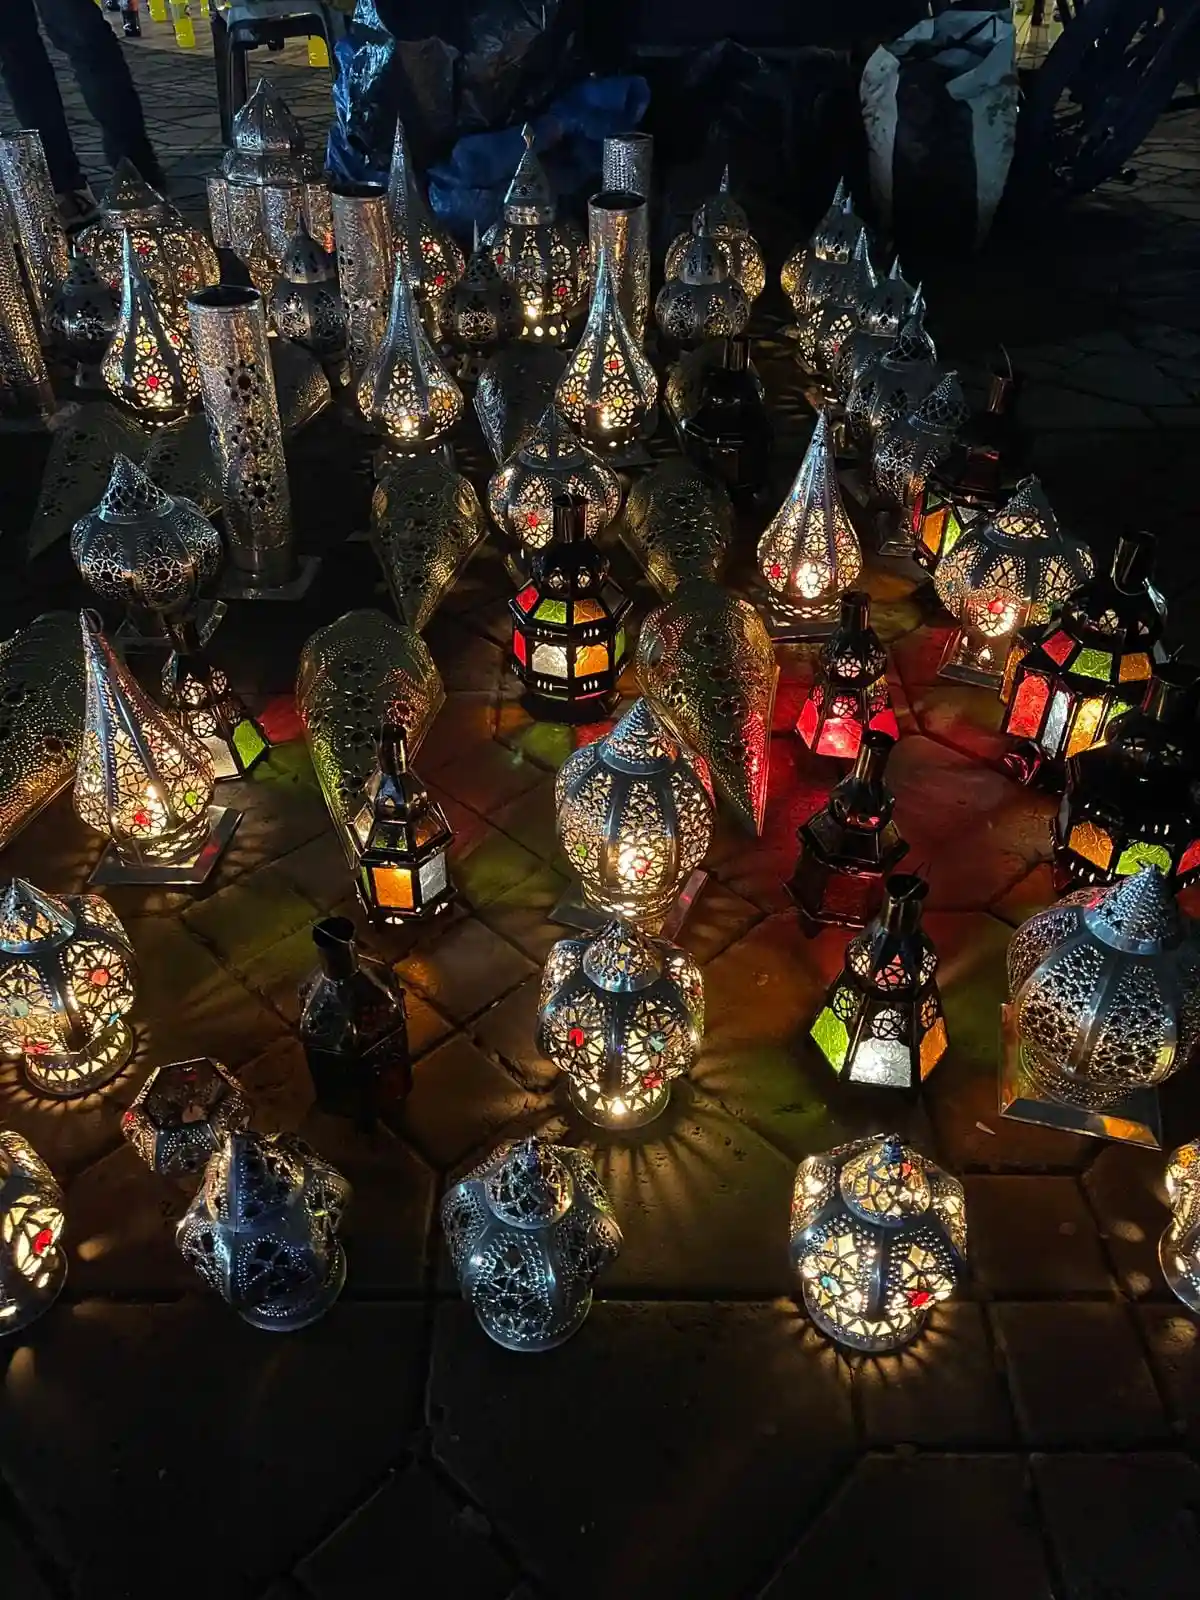 Moroccan lamps sold in marrakech markets